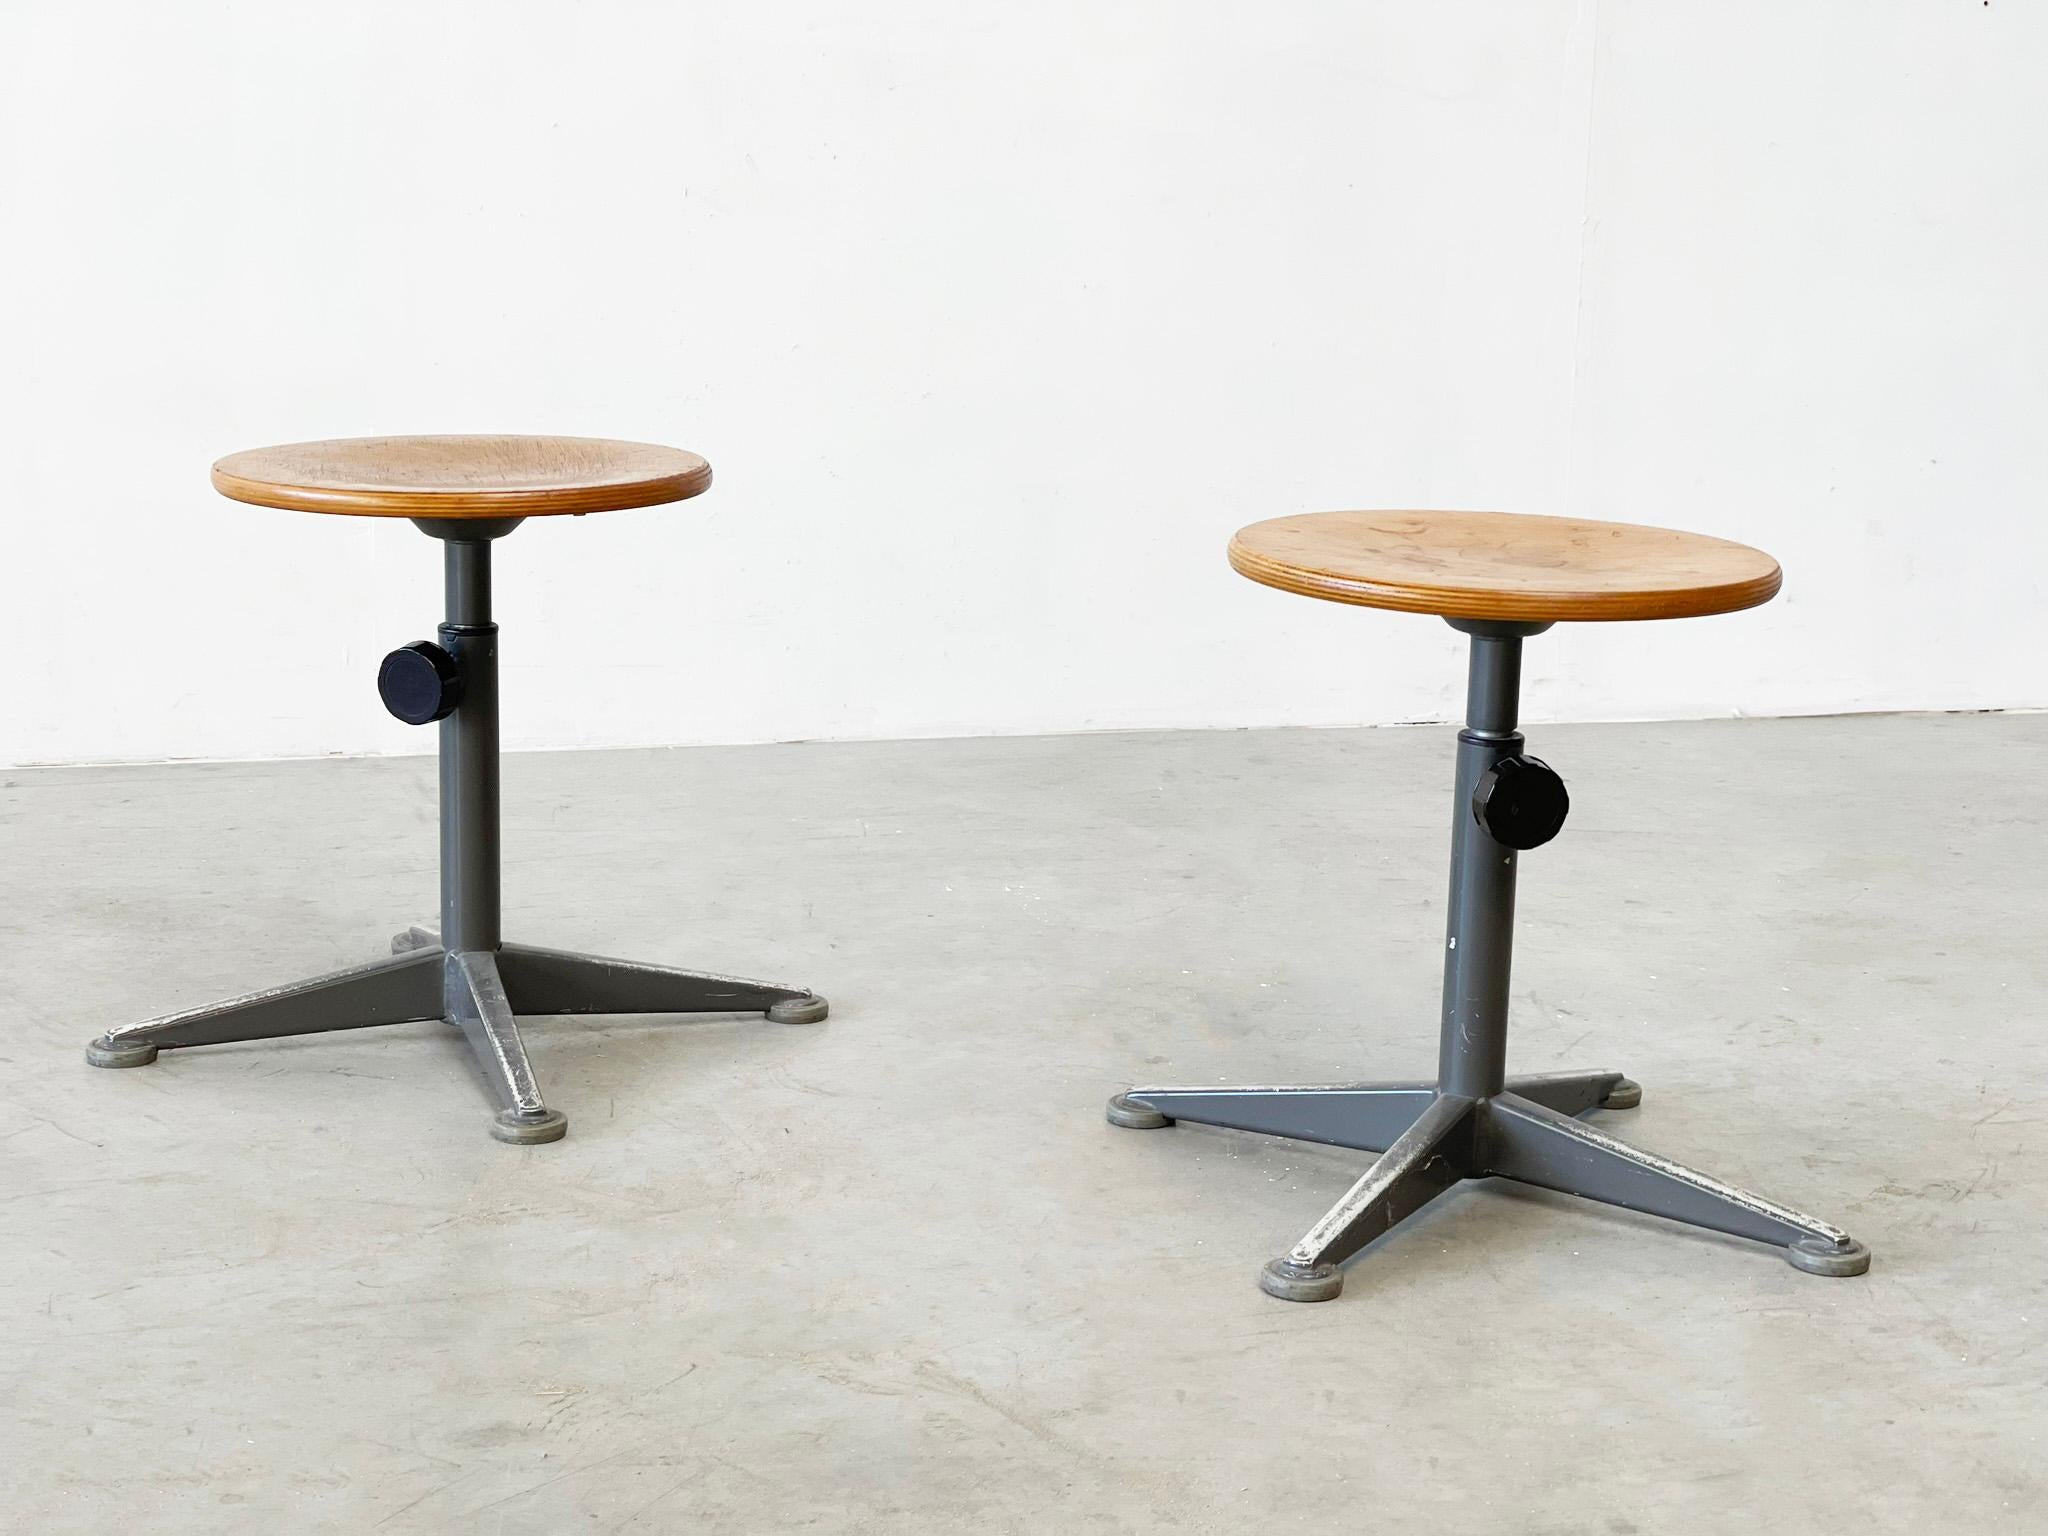 Set of two Friso Kramer stools
These industrial chairs were designed in the 1950s by Friso Kramer and manufactured by Ahrend de circle. Friso Kramer was known for elegant and beautiful industrial design. The chairs have survived the years and are in